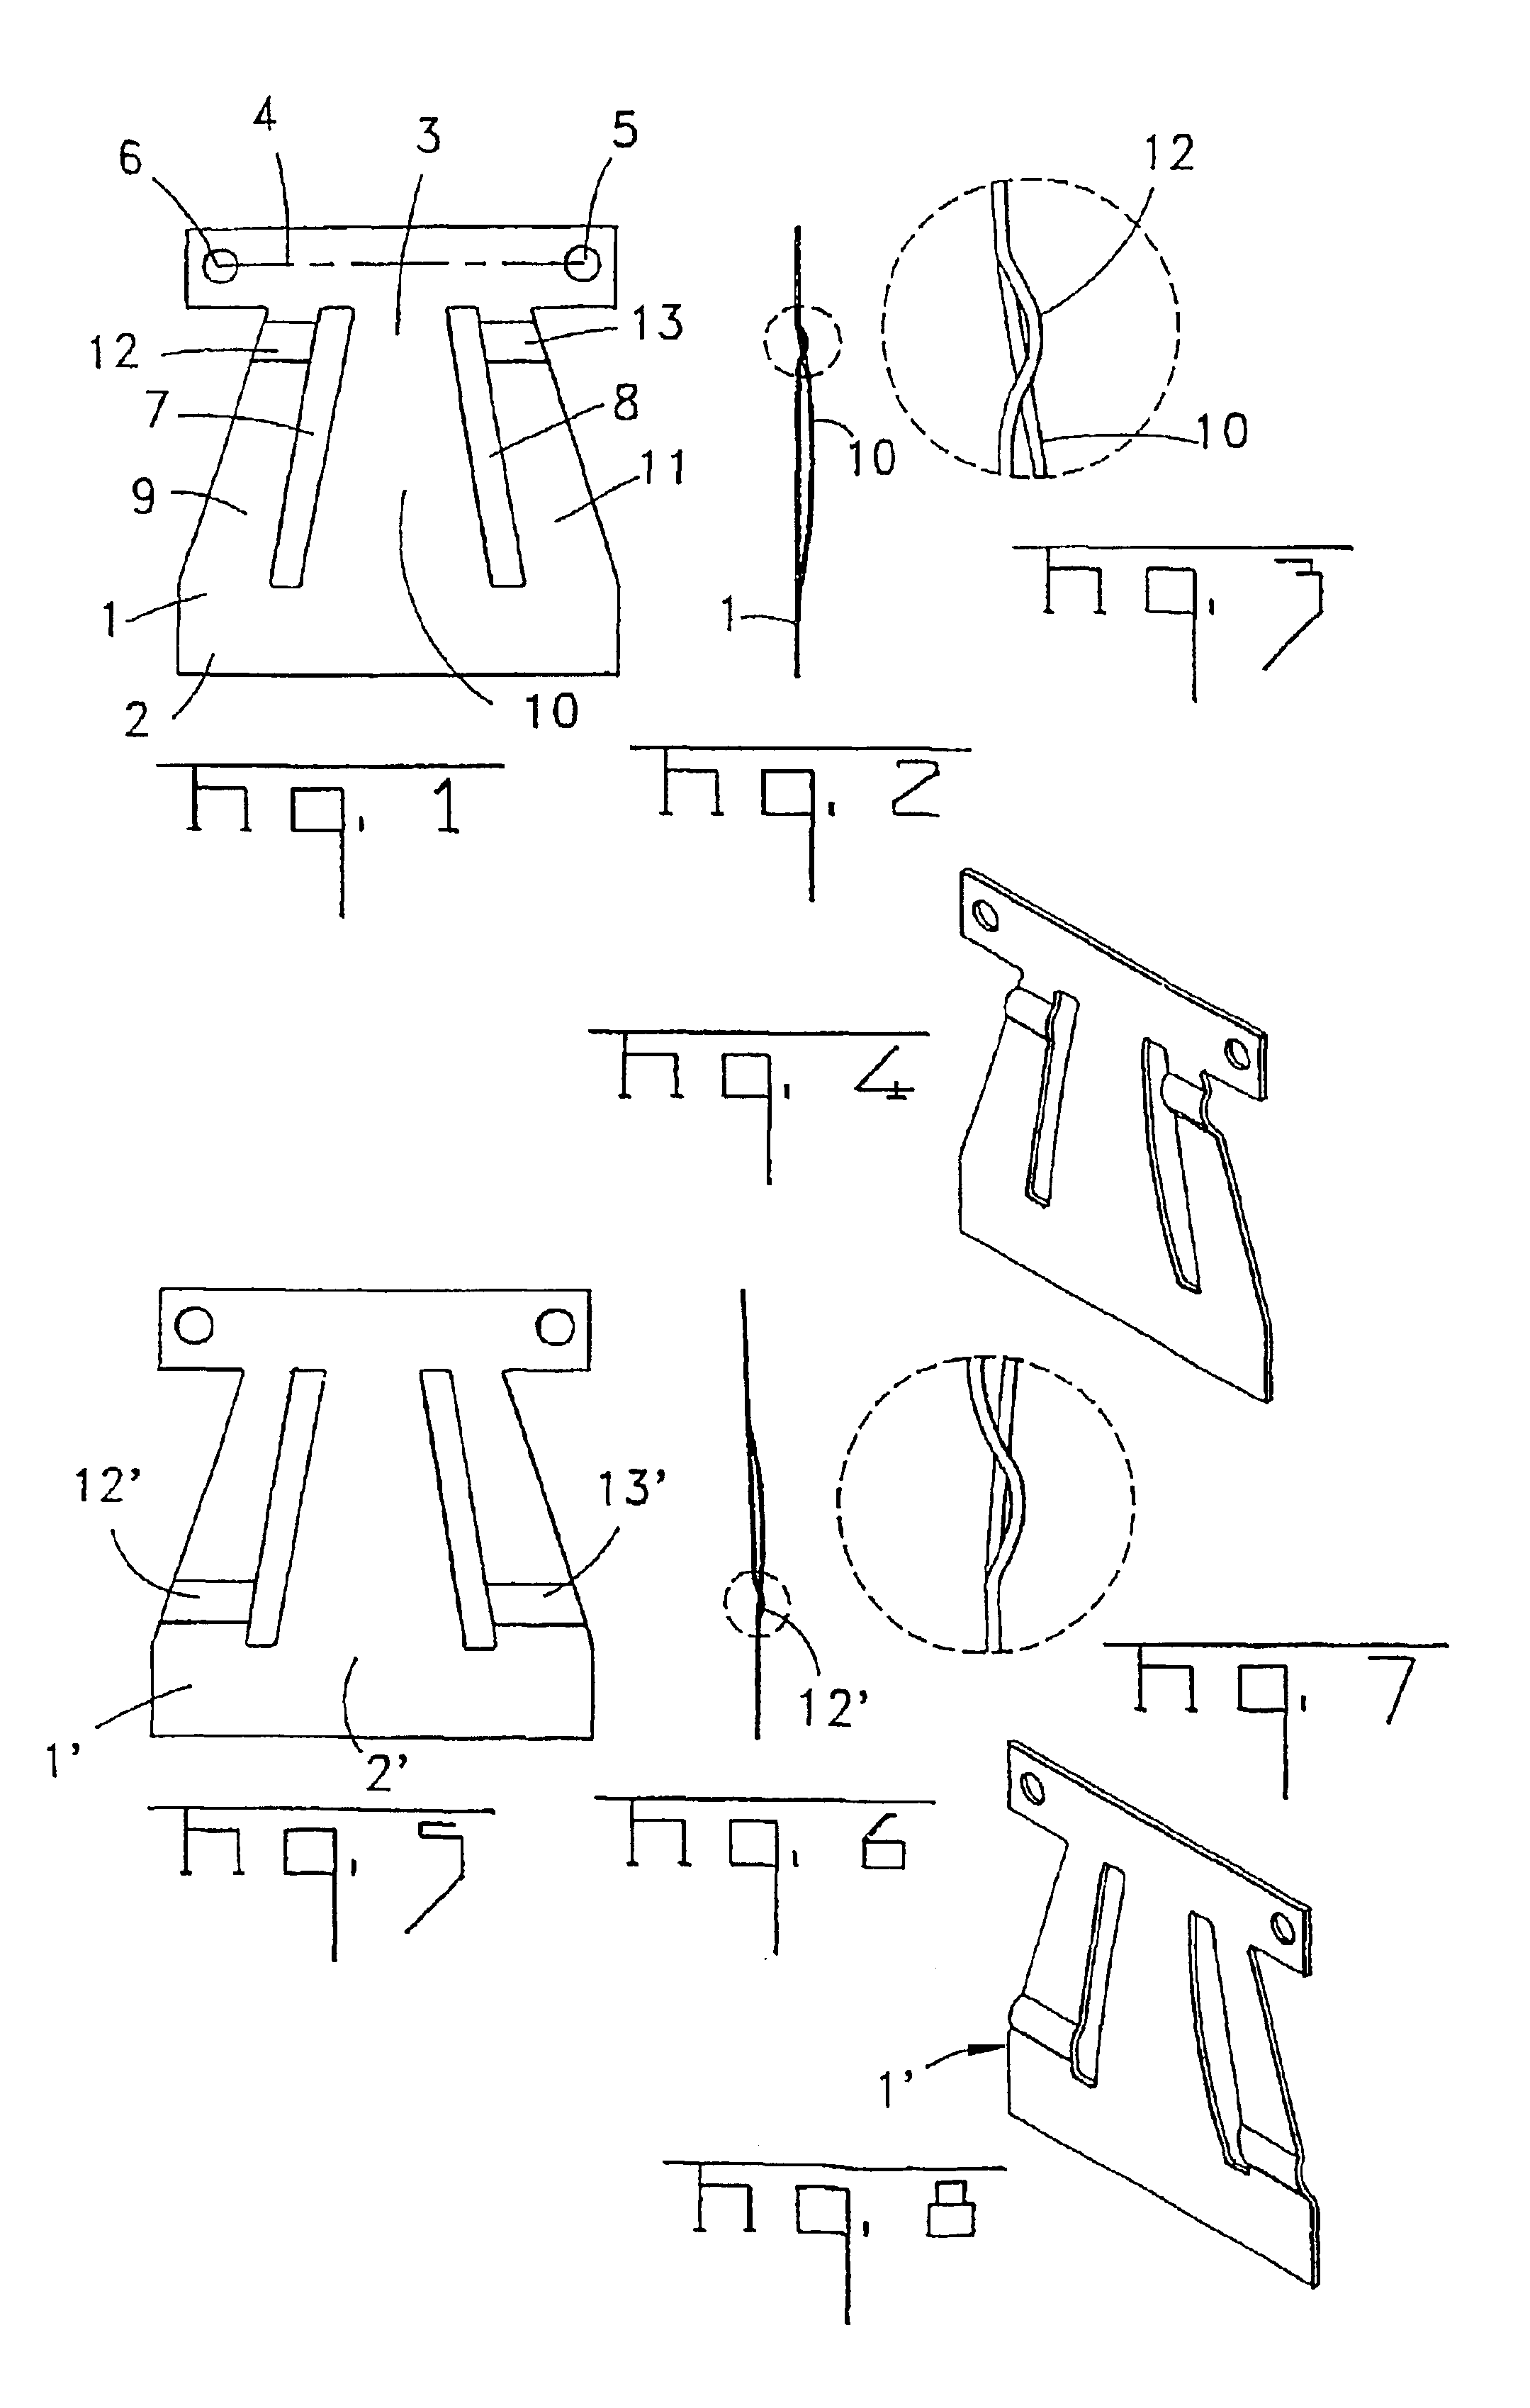 Bistable electric switch and relay with a bi-stable electrical switch